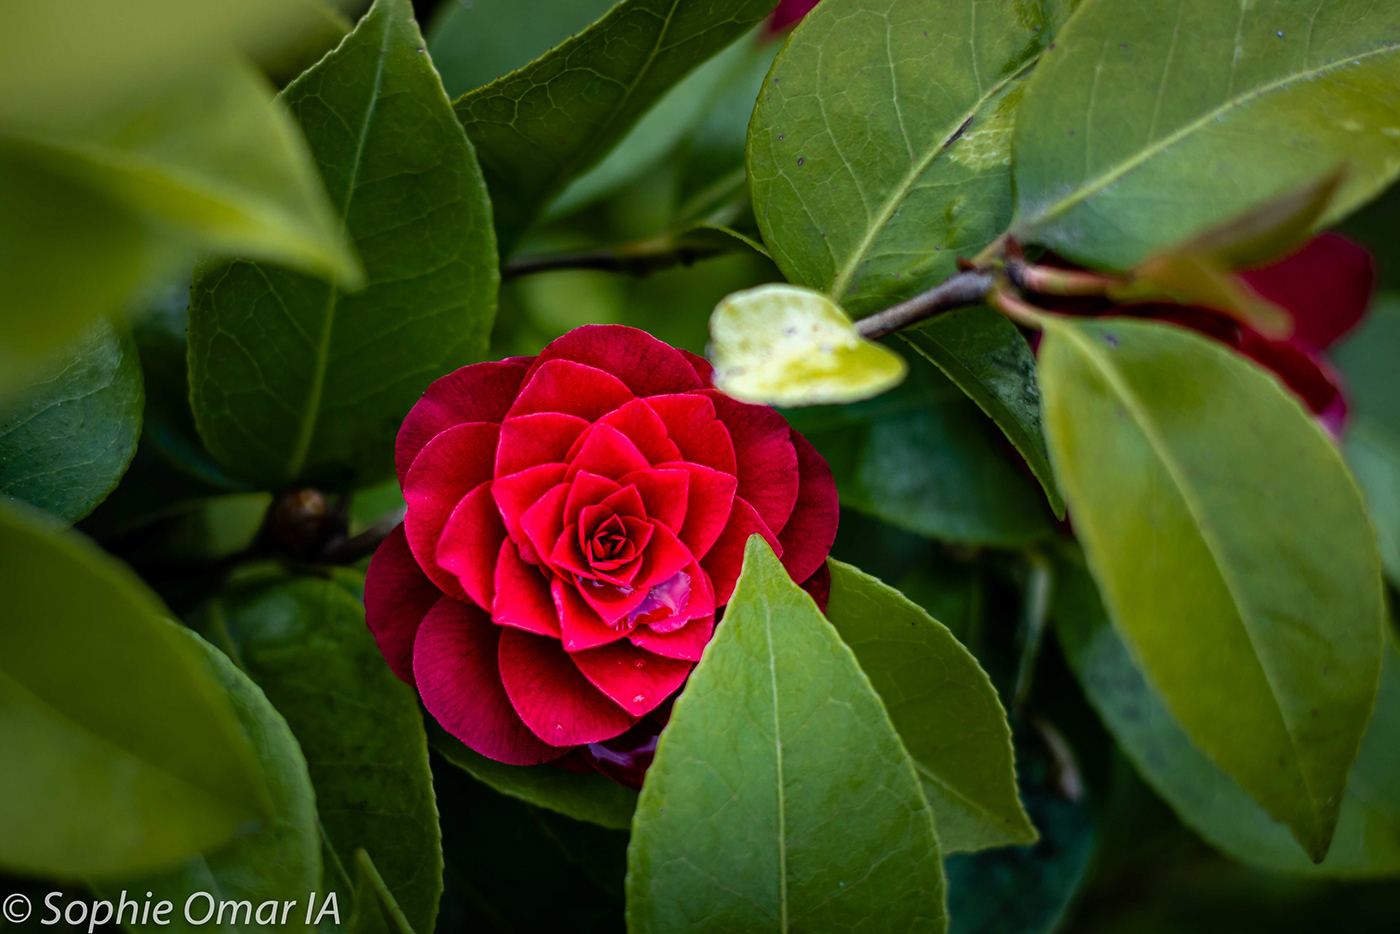 The lonely red camelia